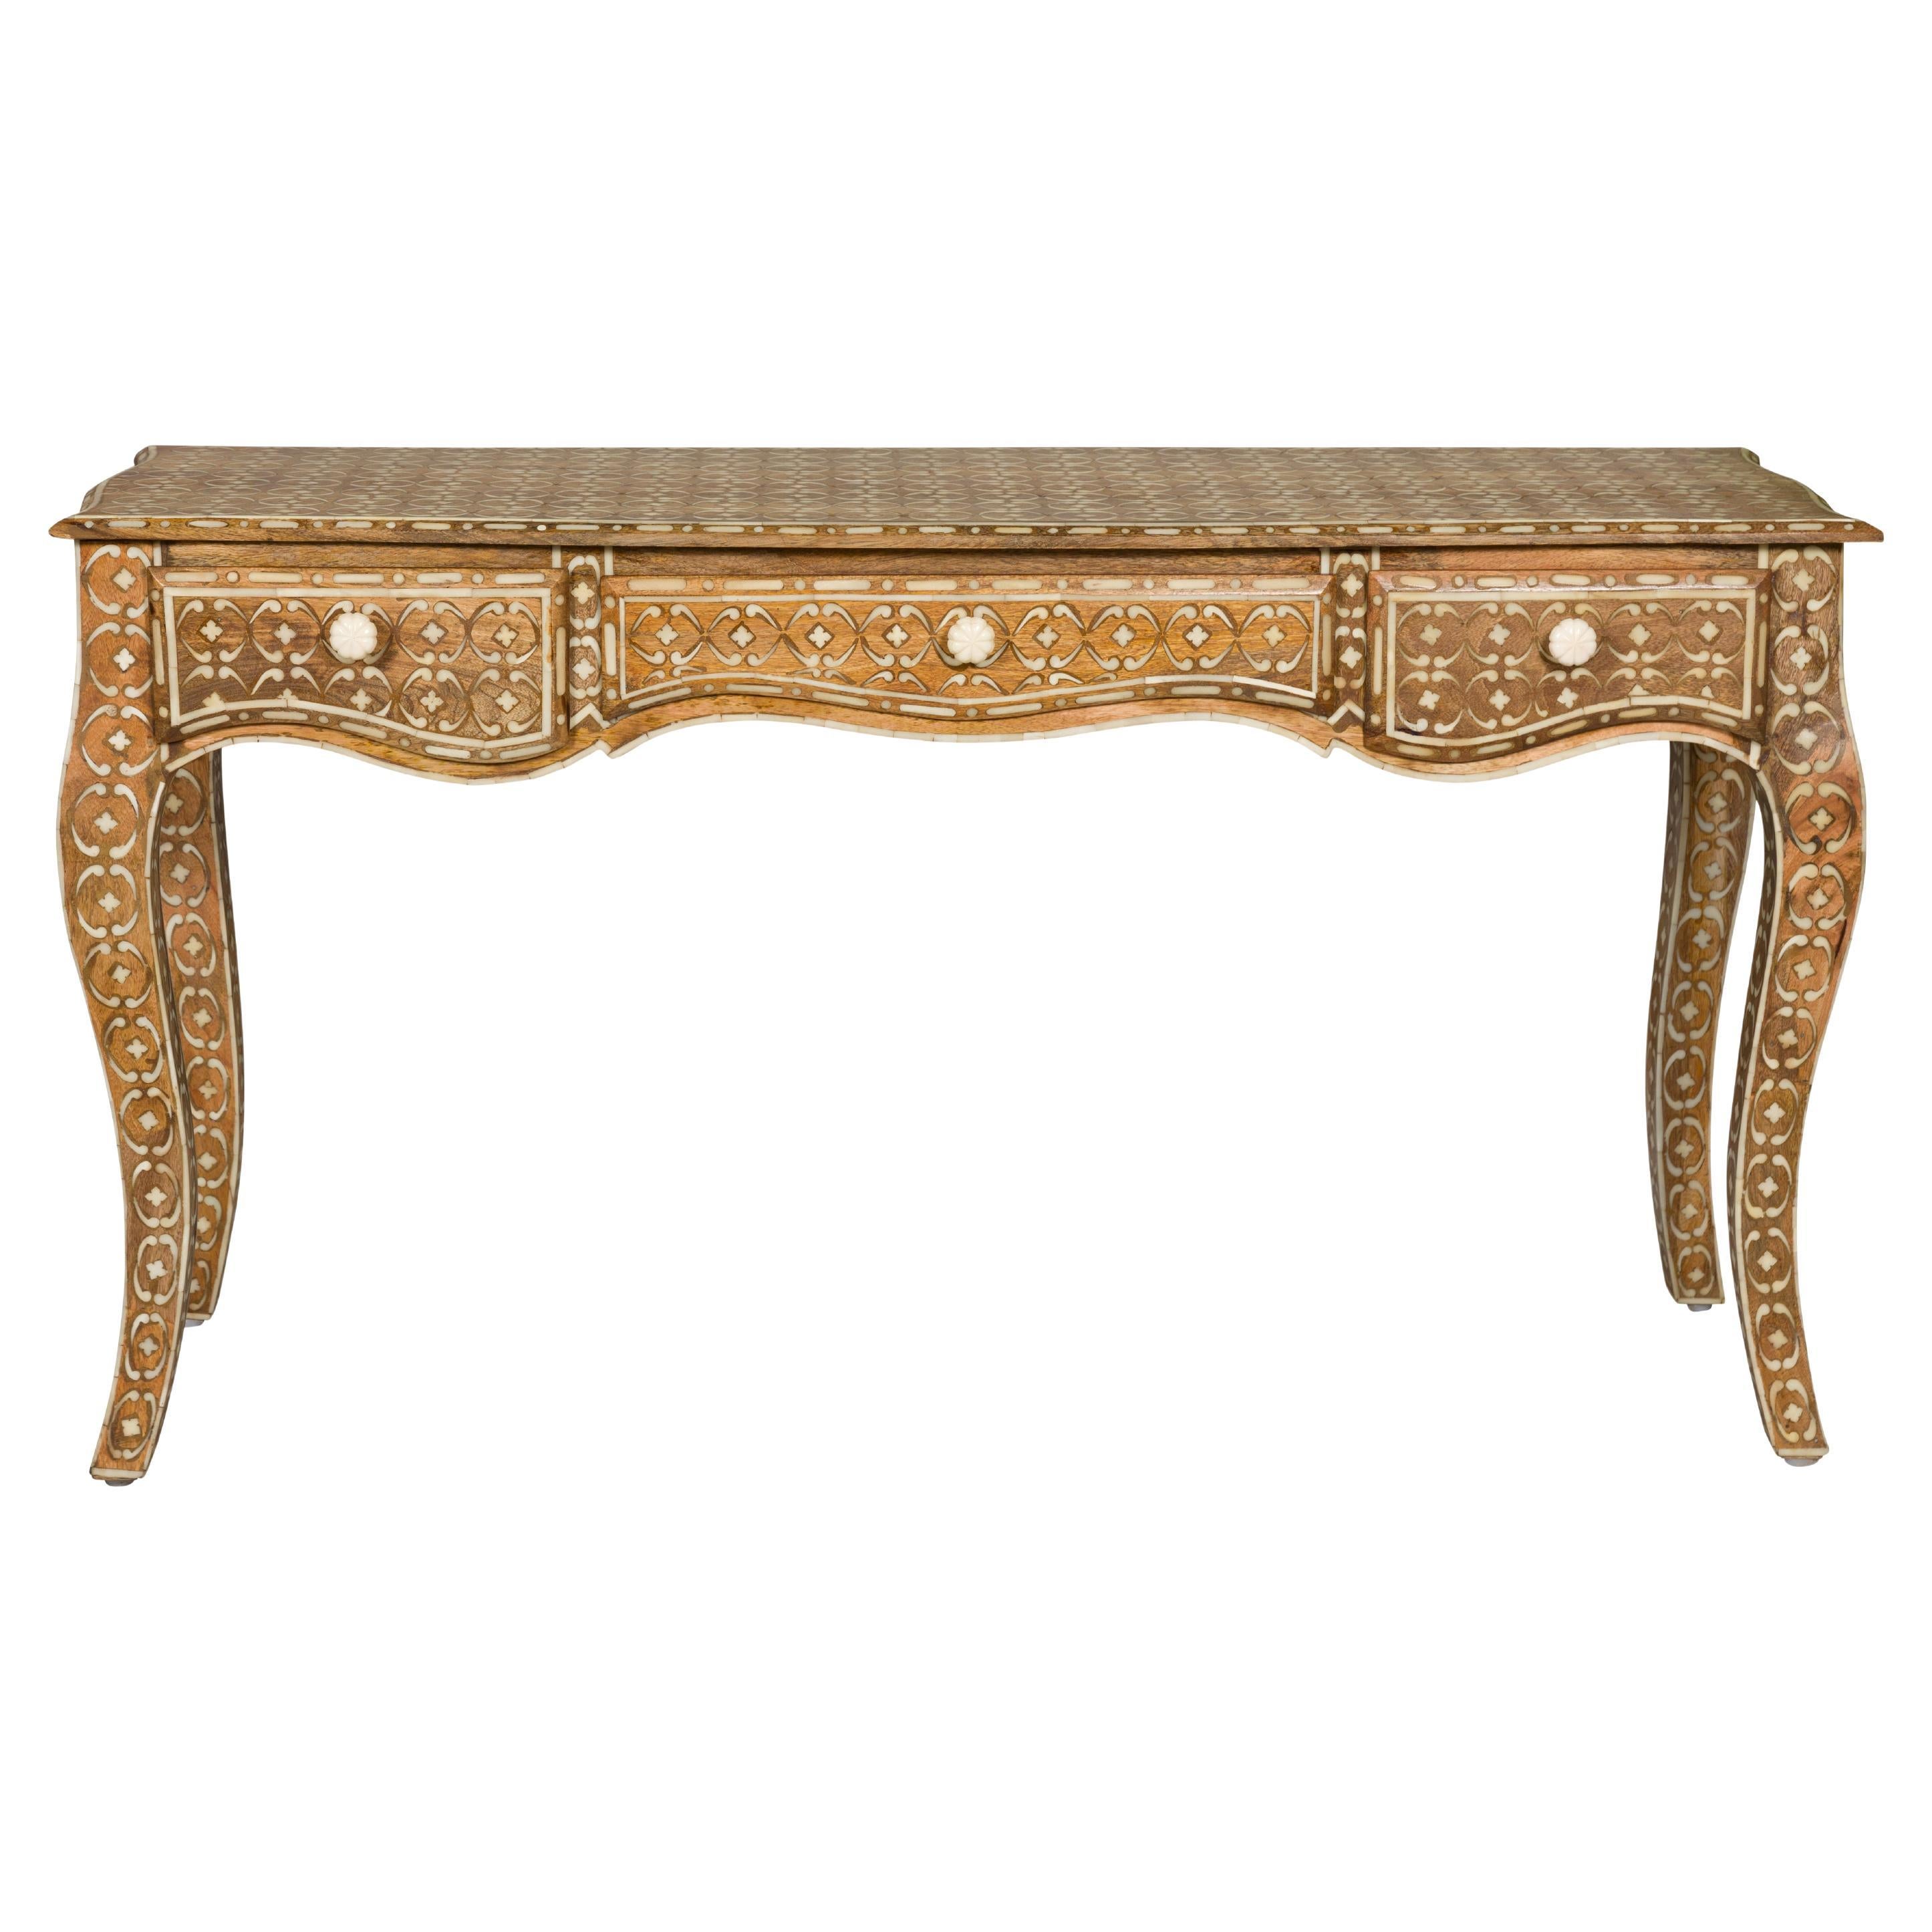 Anglo-Indian Louis XV Style Console Table with Three Drawers and Cabriole Legs For Sale